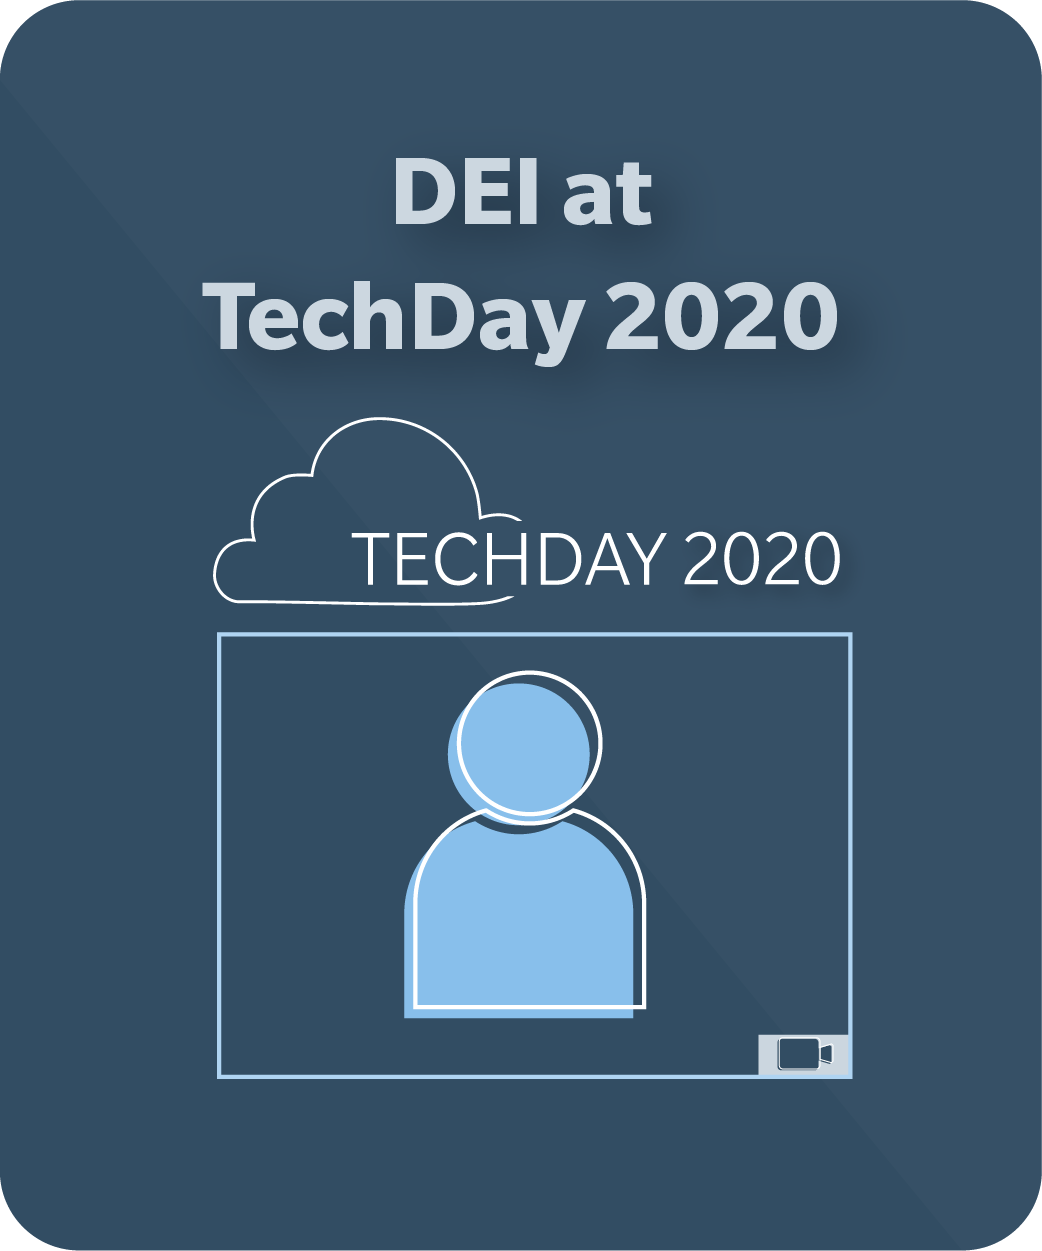 DEI at TechDay 2020, TechDay icon and an illustration of a person on video